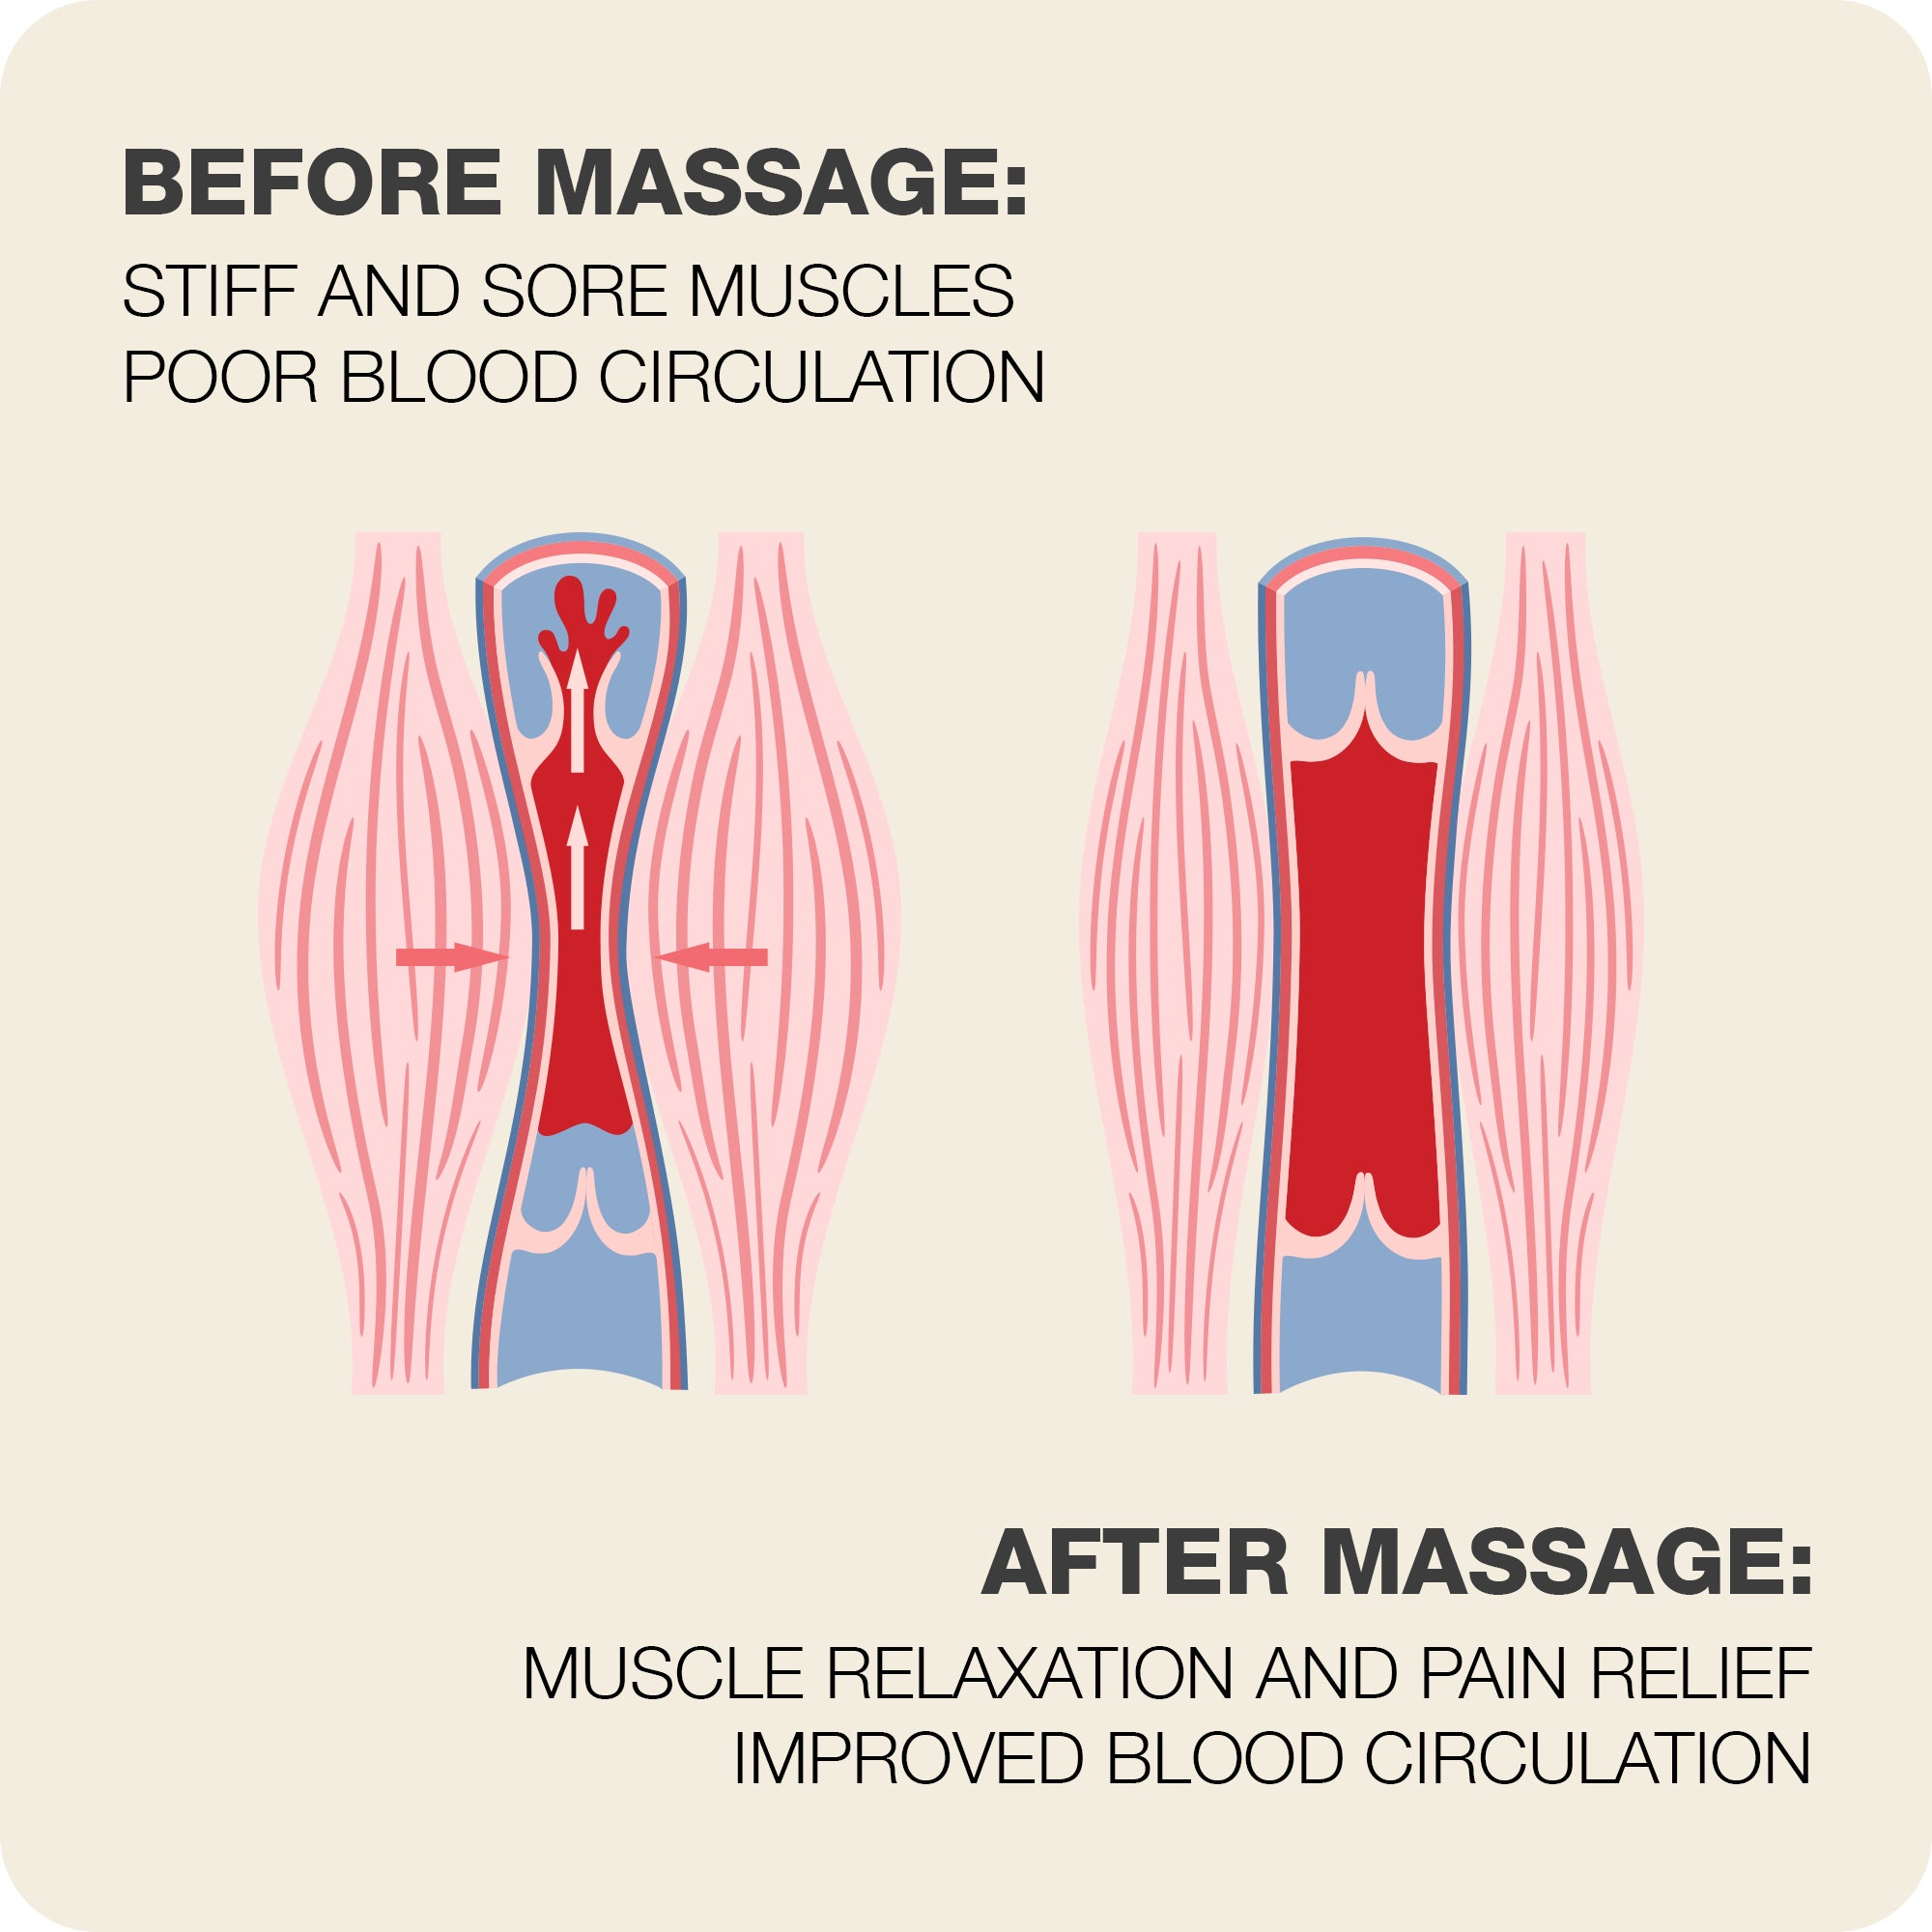 comparison of muscle tissue before and after massage